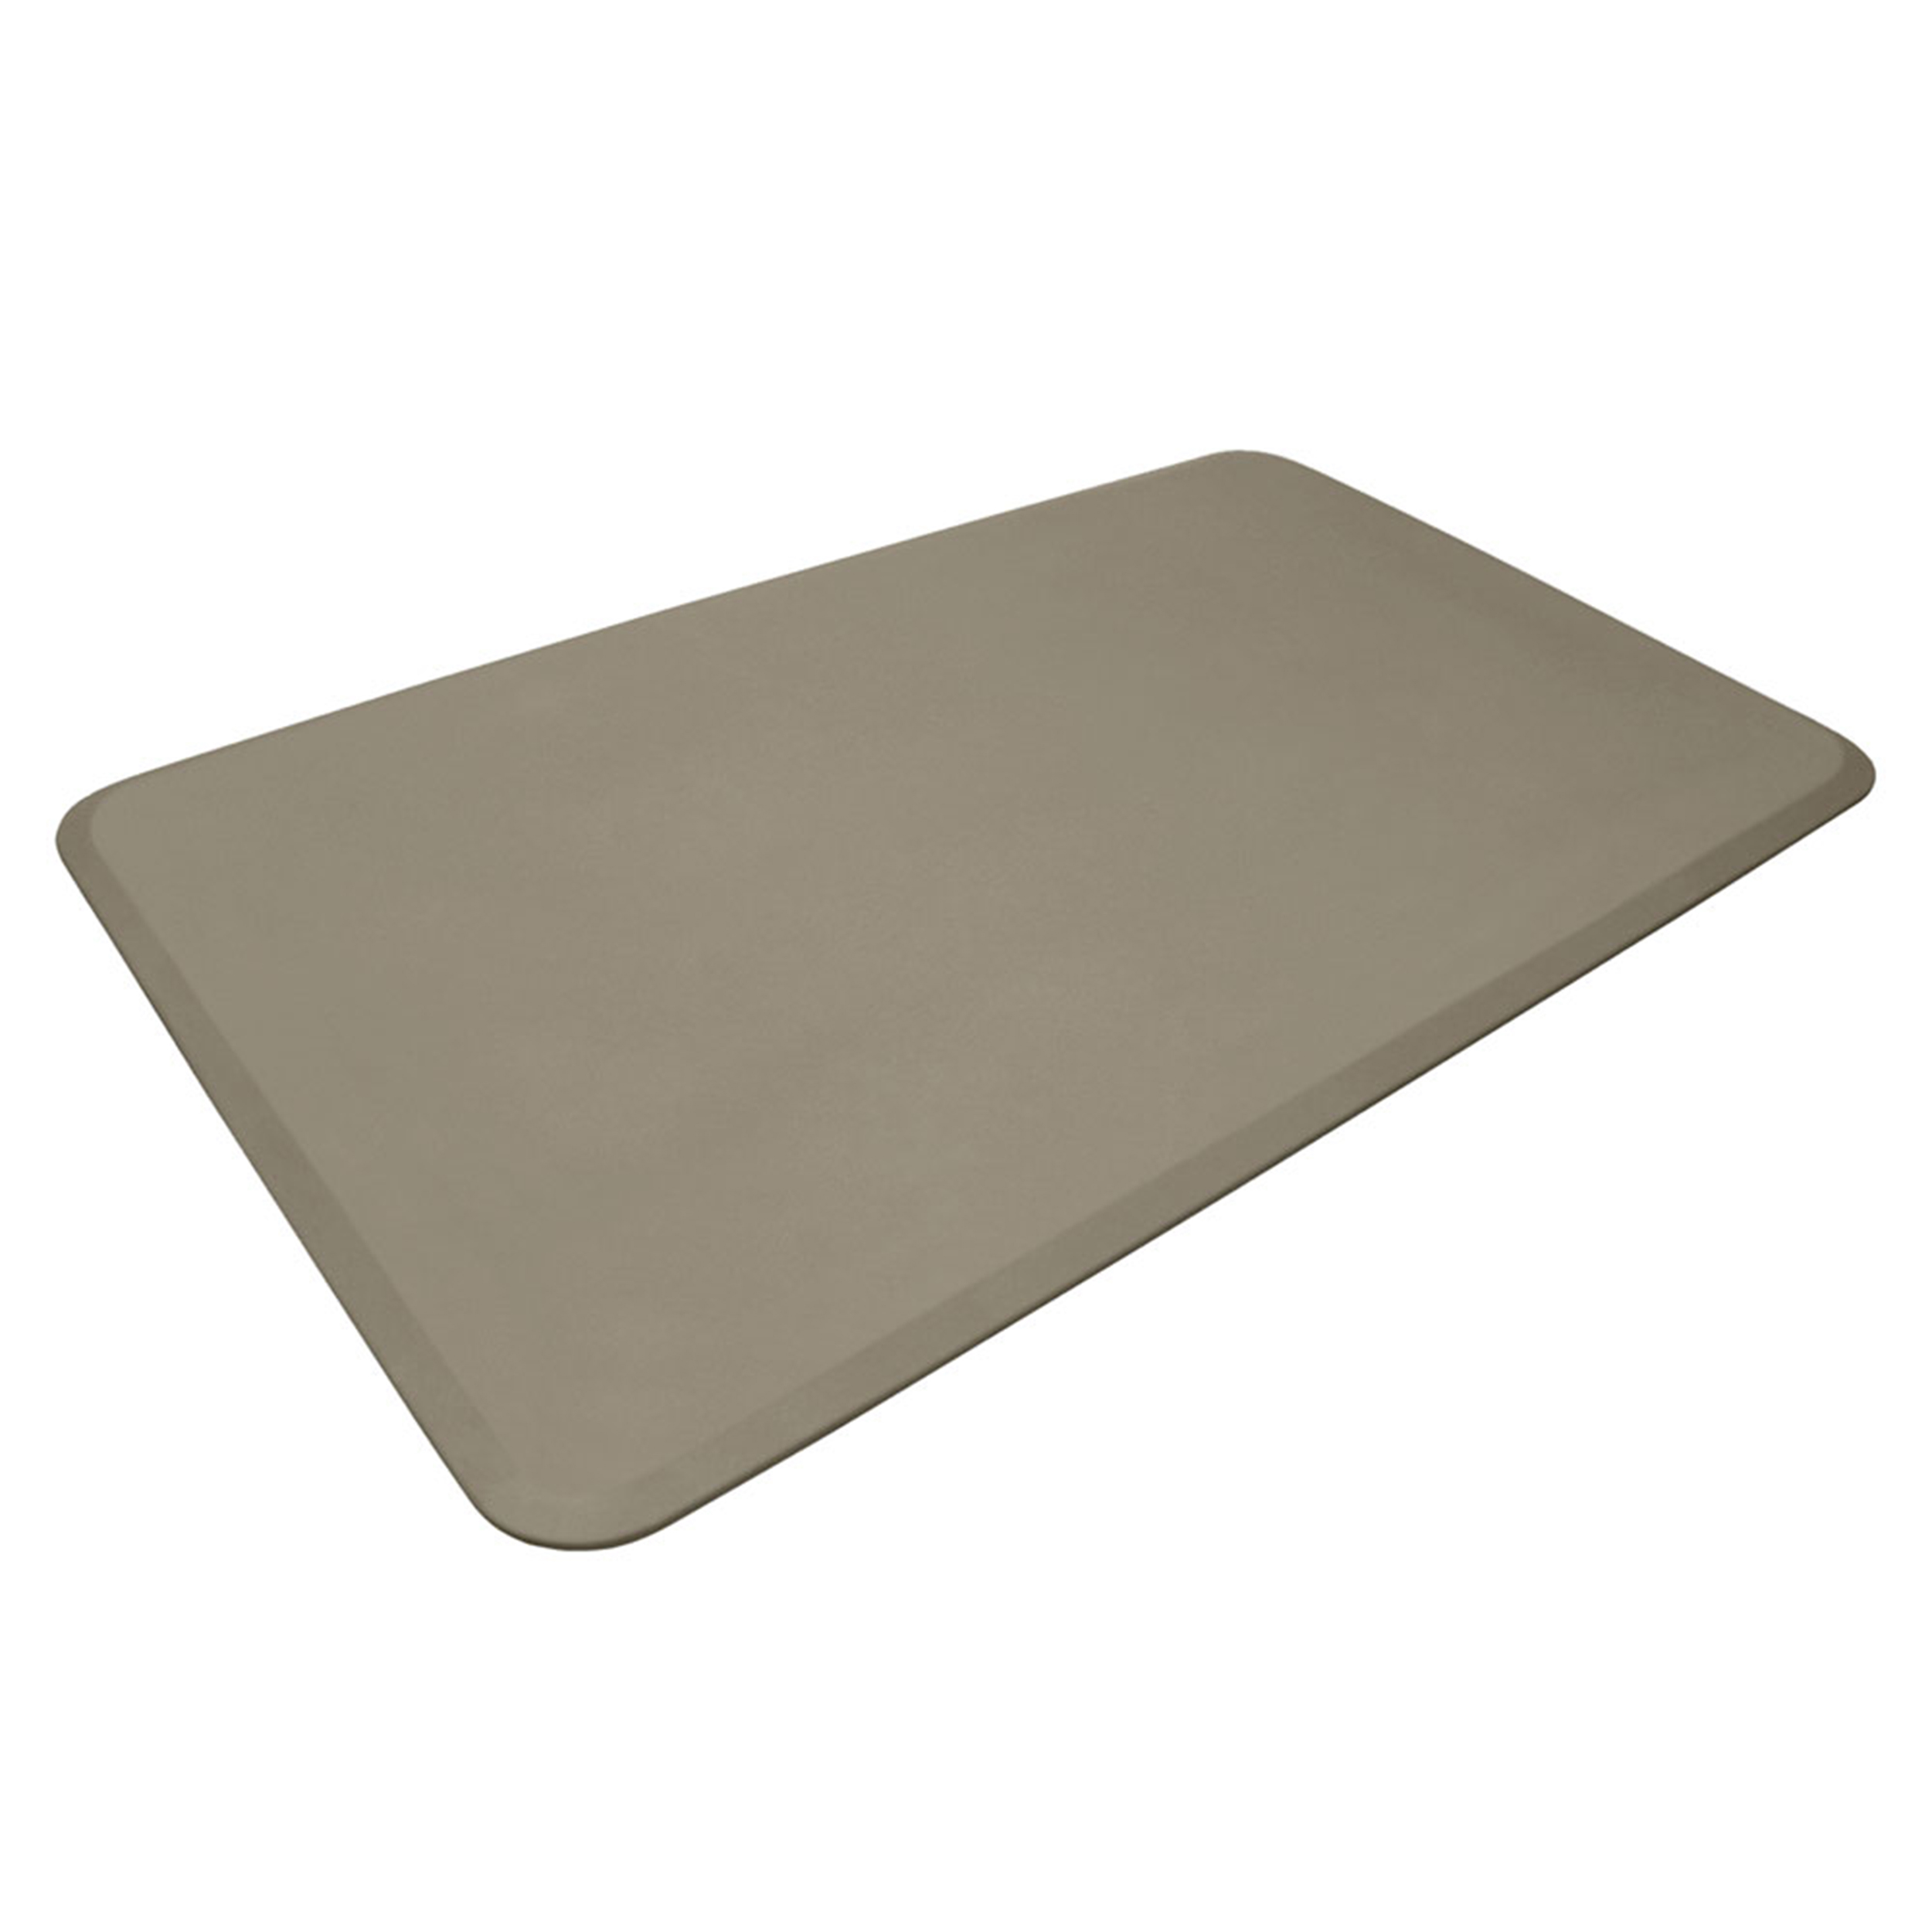 Eco-pro Commercial Mat, Taupe, 36" X 60"